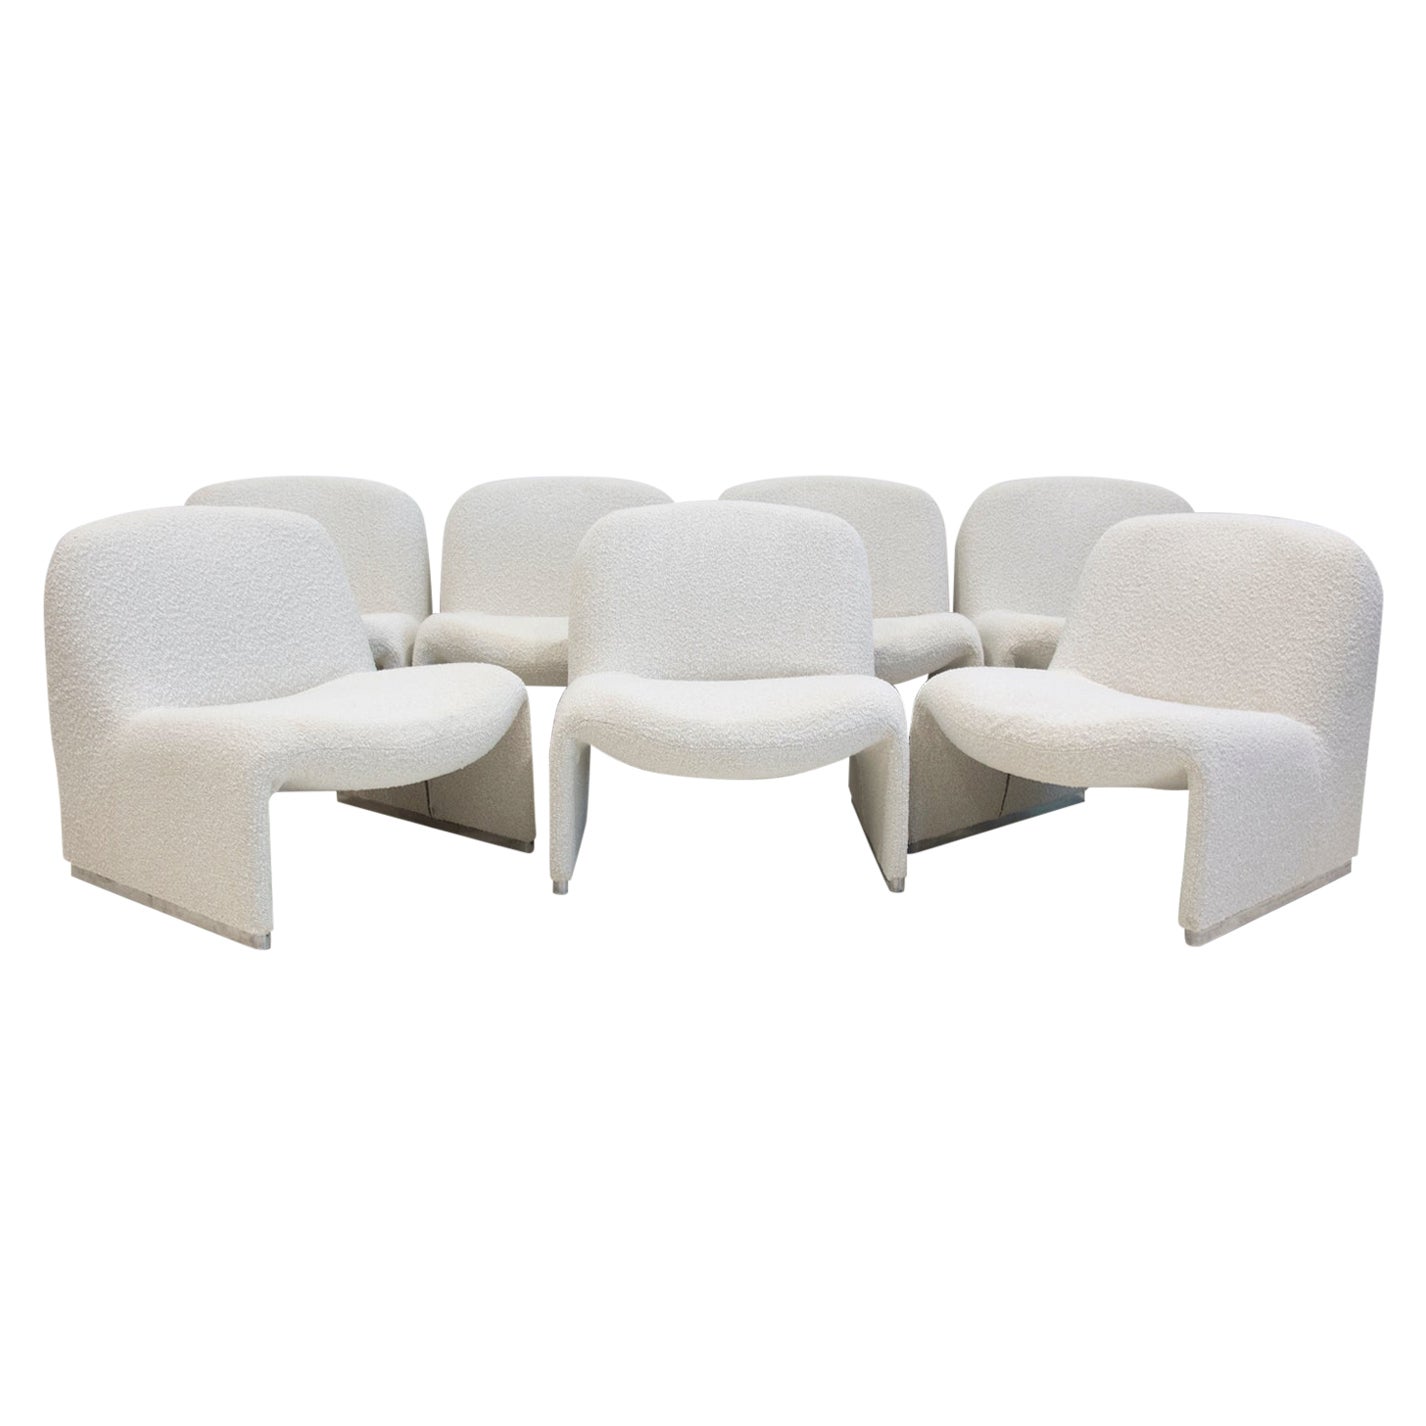 Five White Bouclé Fabric Upholstered Giancarlo Piretti Alky Easy Chairs